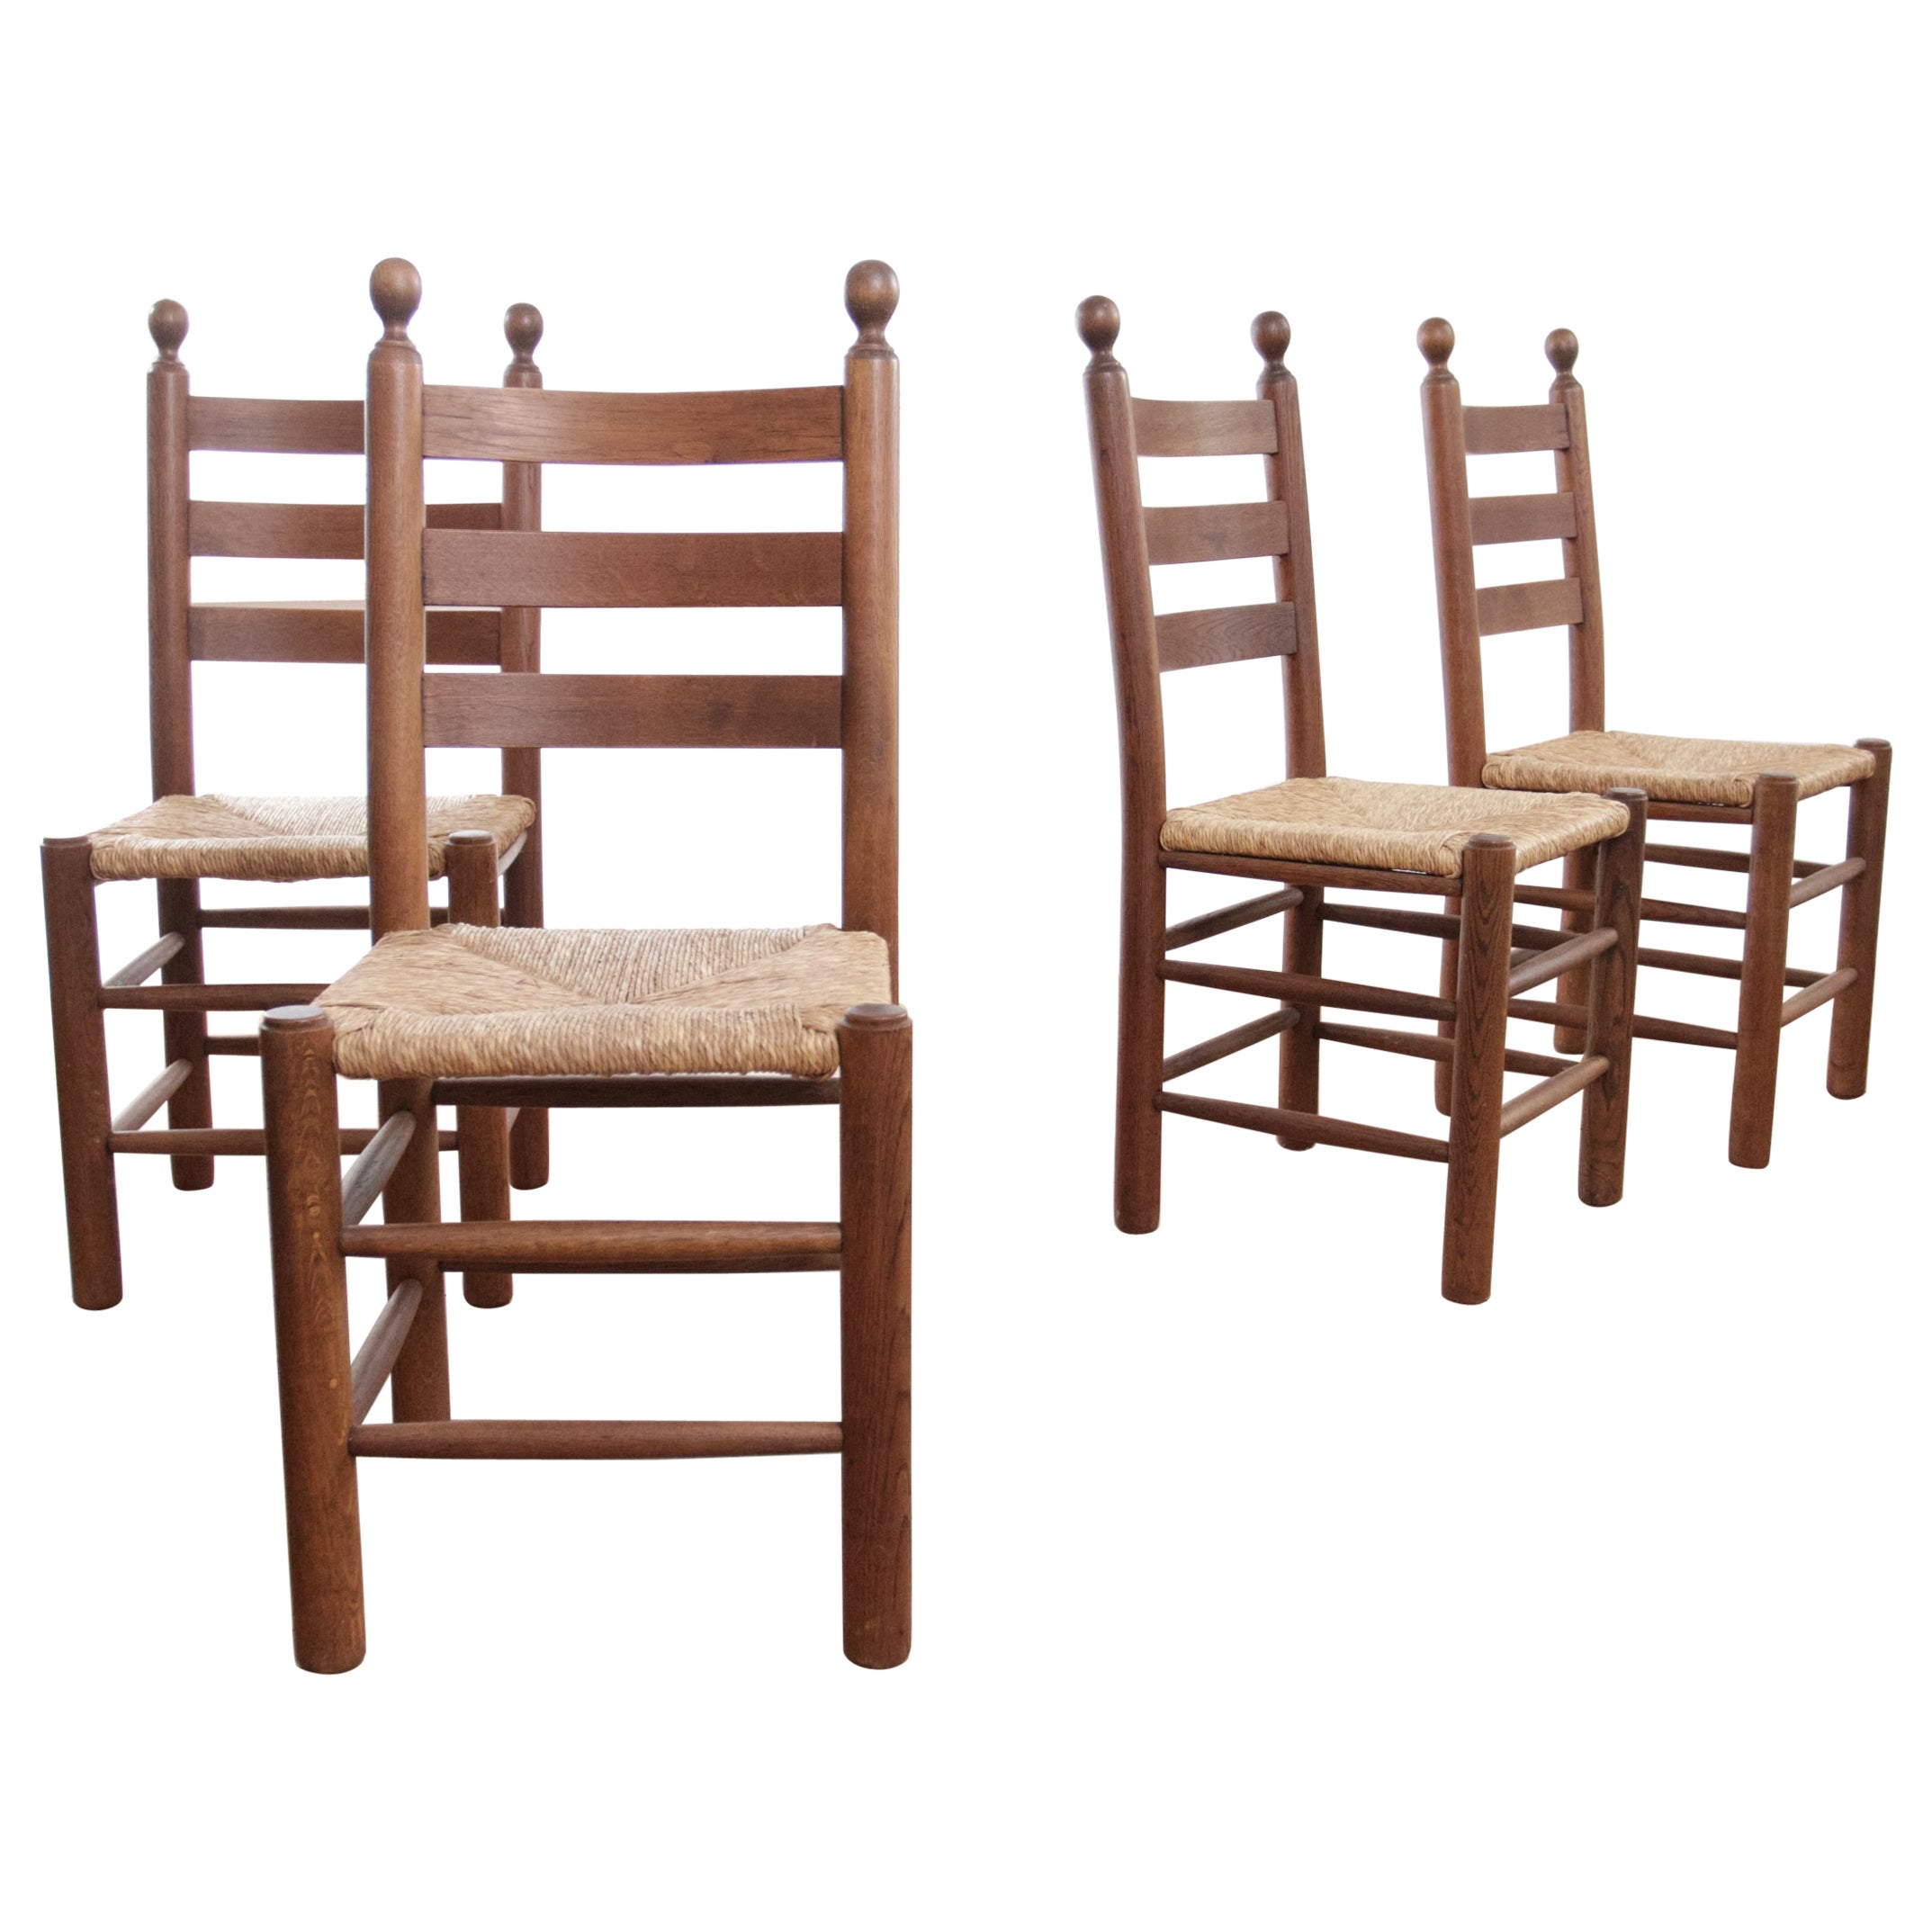 4 French Ladder Back Oak Rush Seat Dining Chairs